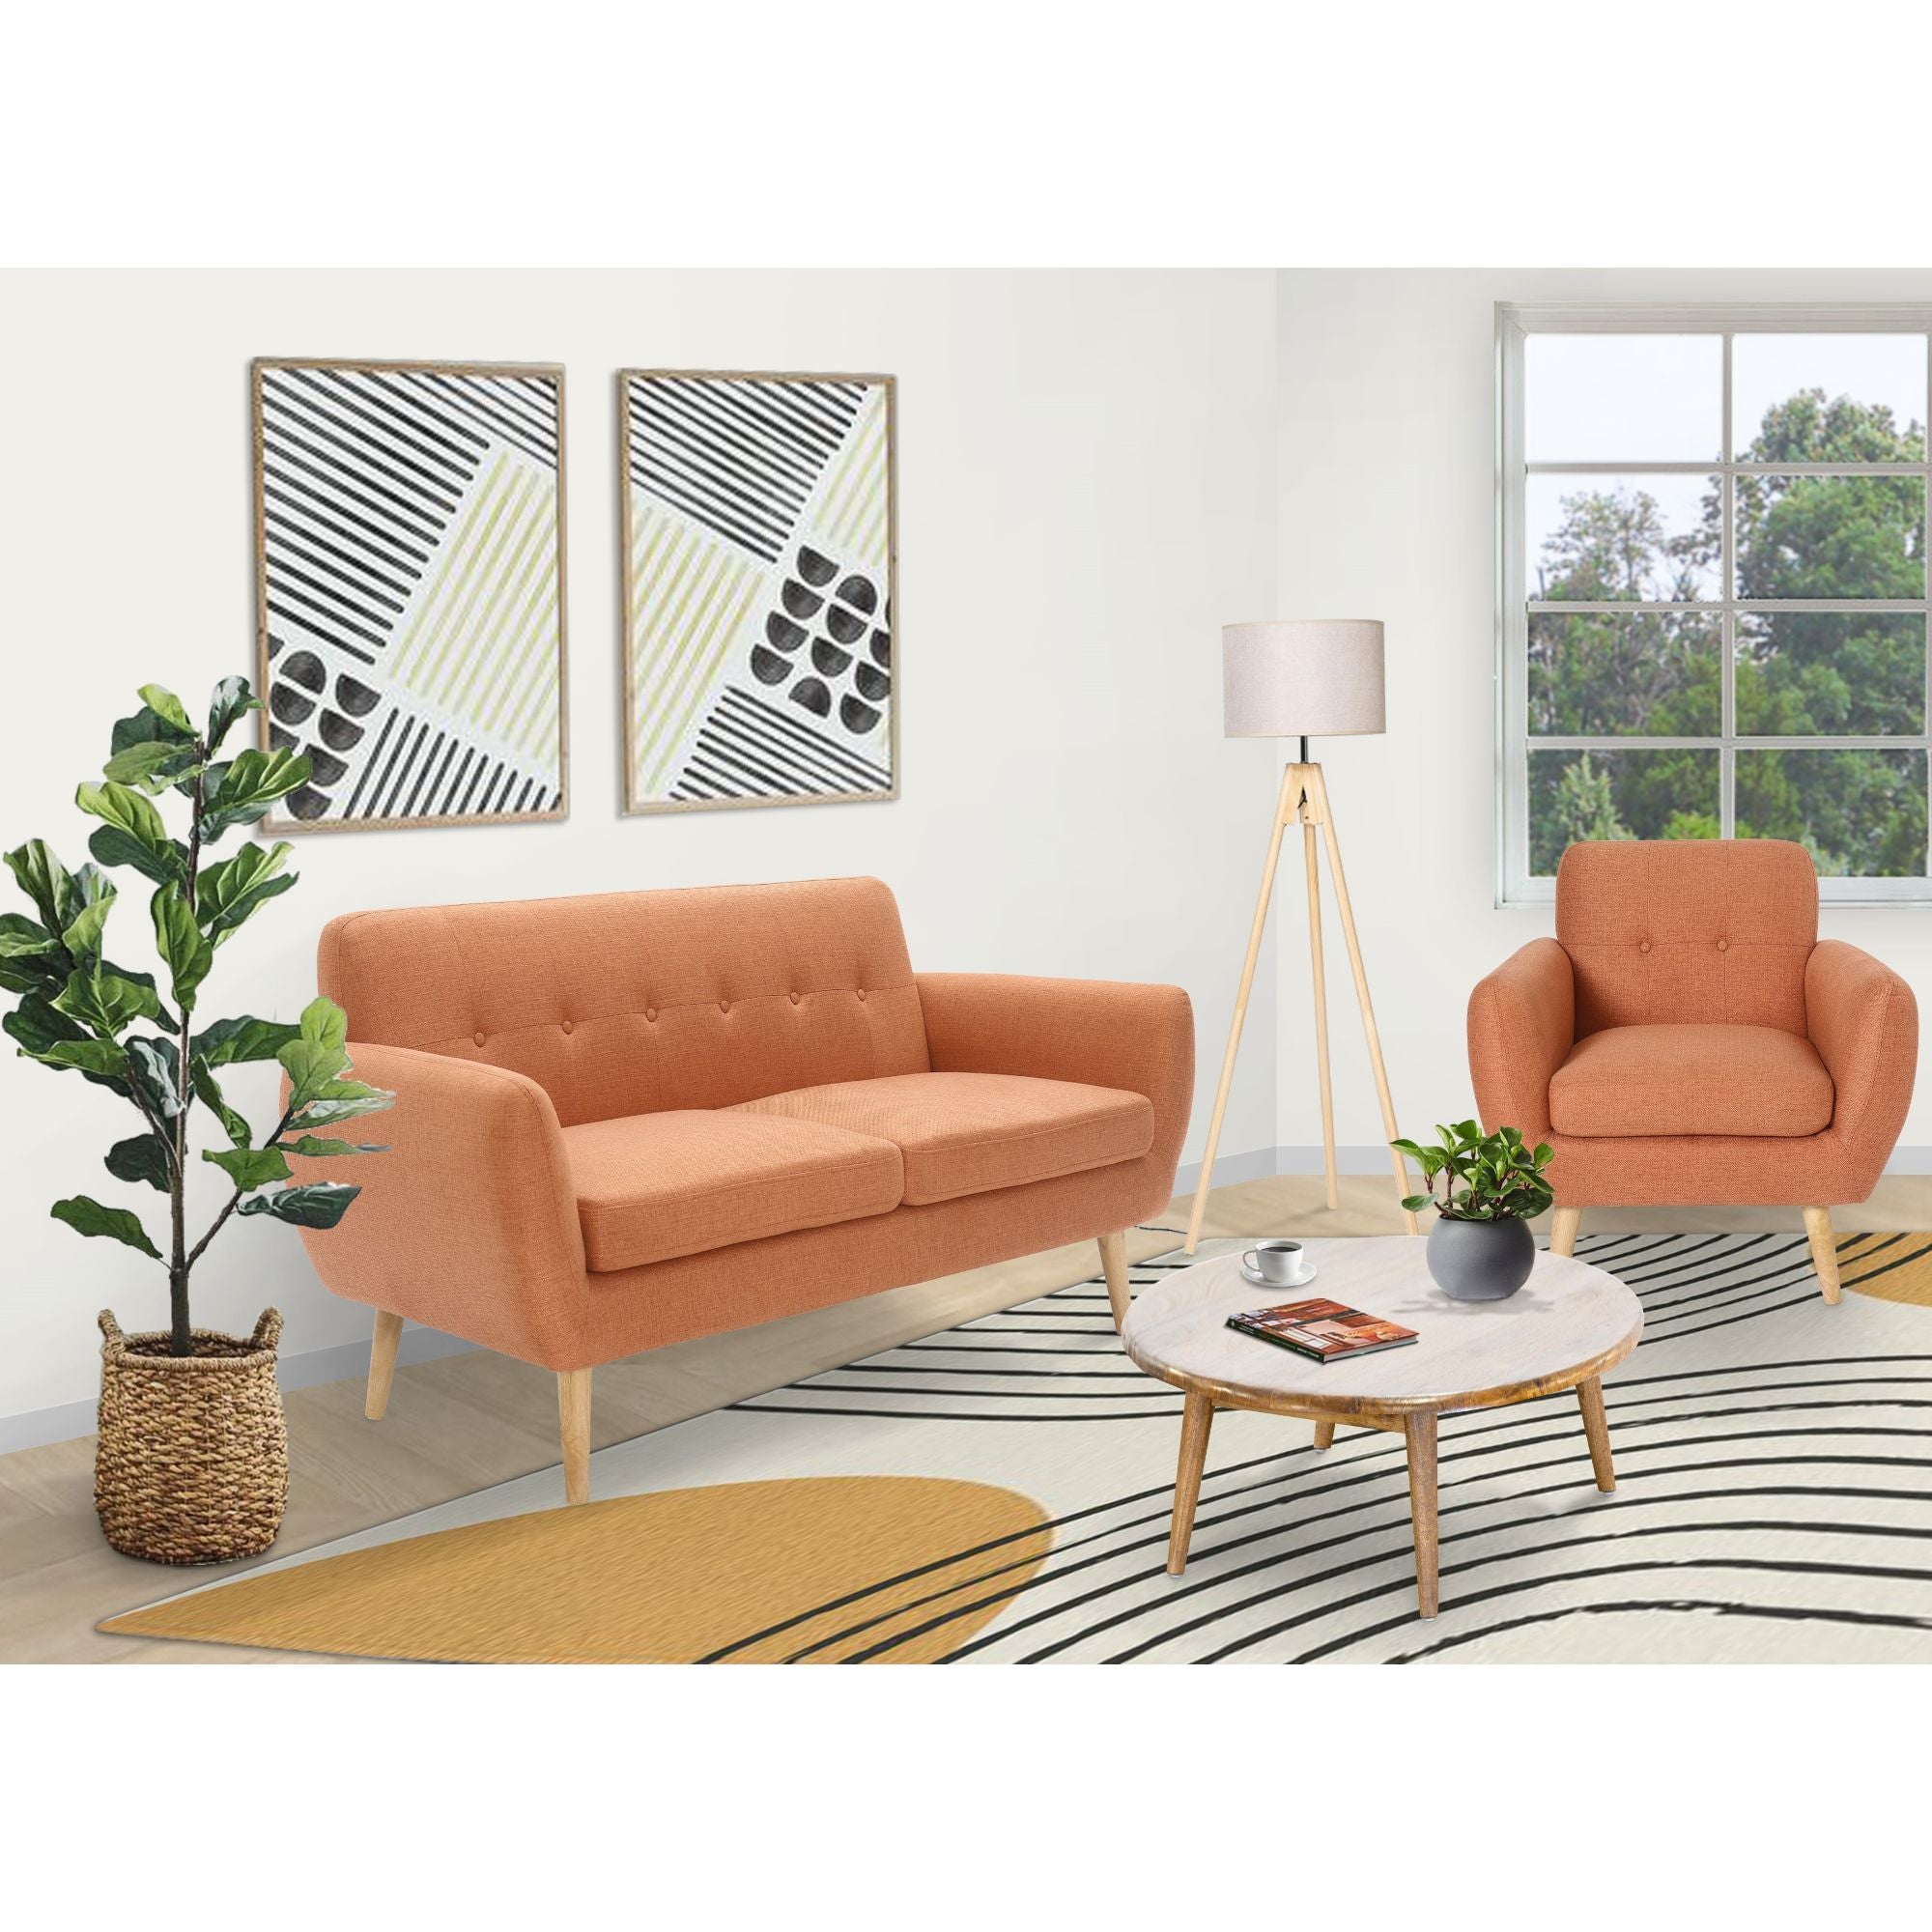 Dane 3 + 1 Seater Fabric Upholstered Sofa Armchair Lounge Couch - Orange